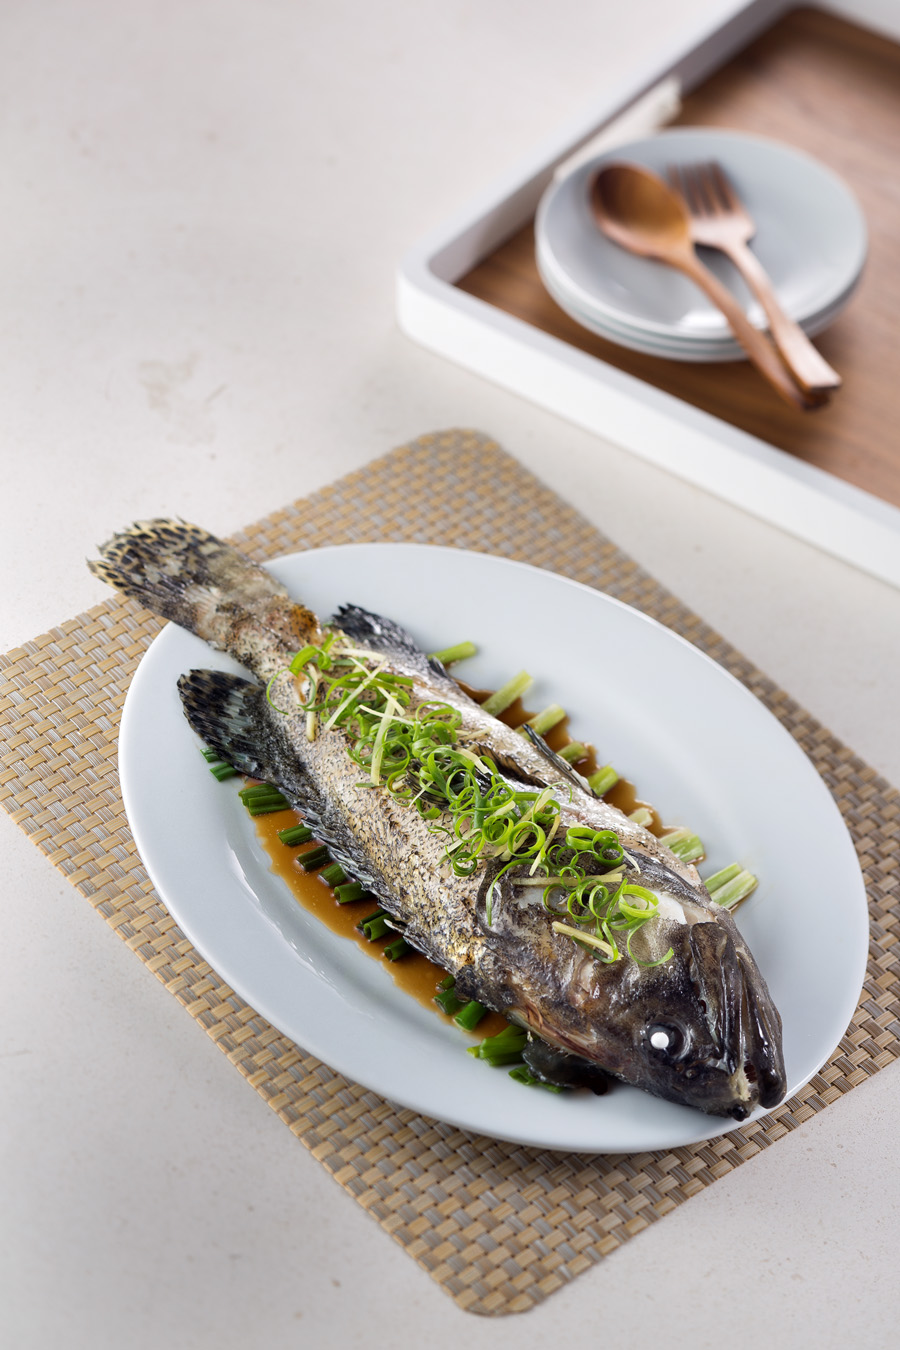 Miele_DG6010_Recipe_Steamed whole giant grouper